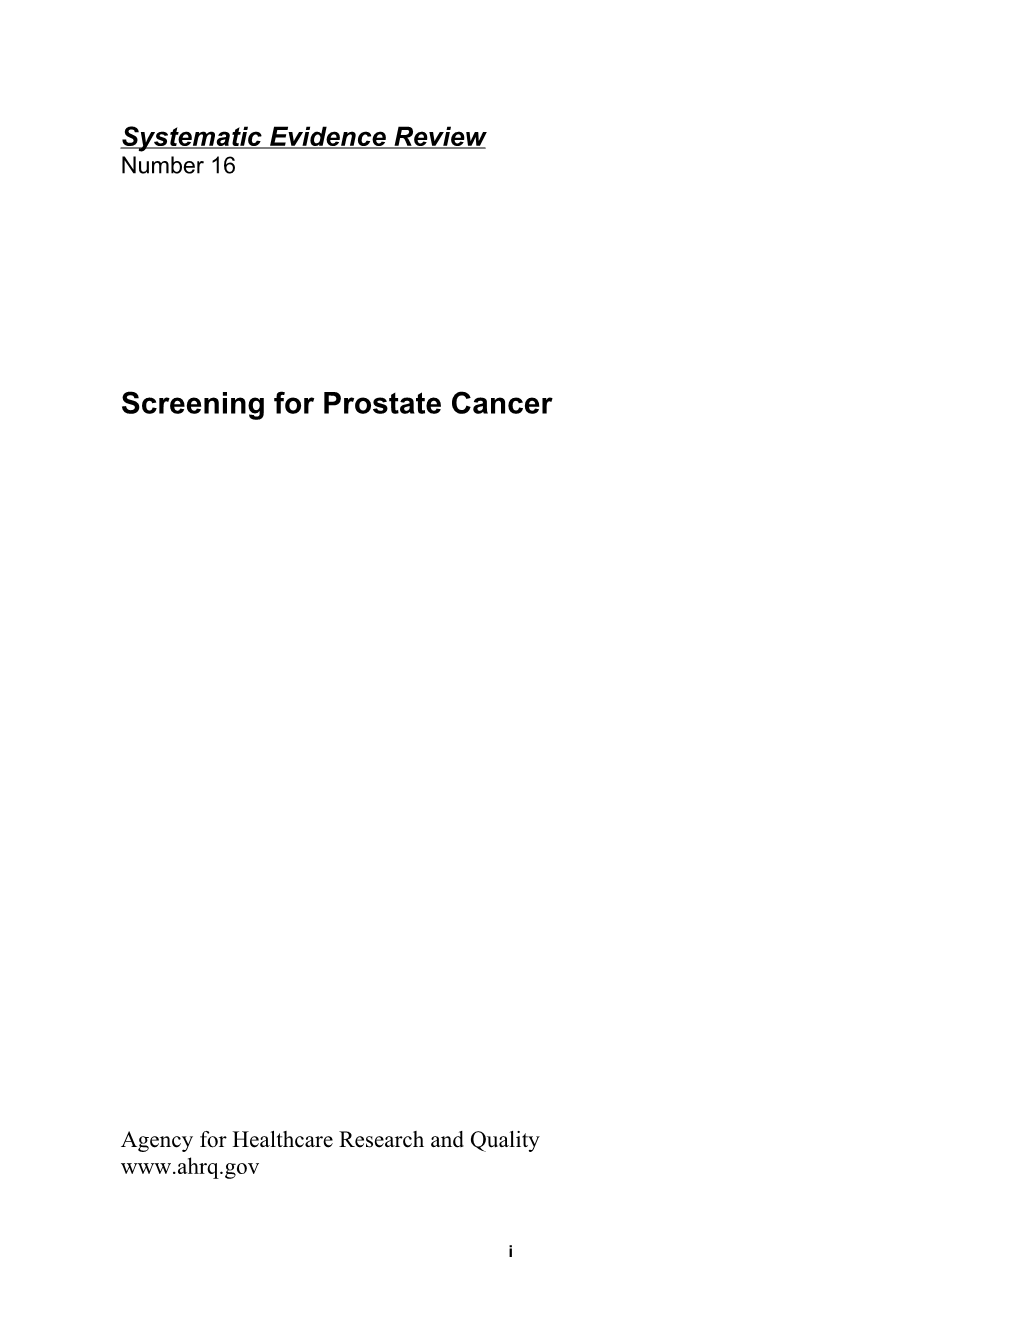 Screening for Prostate Cancer